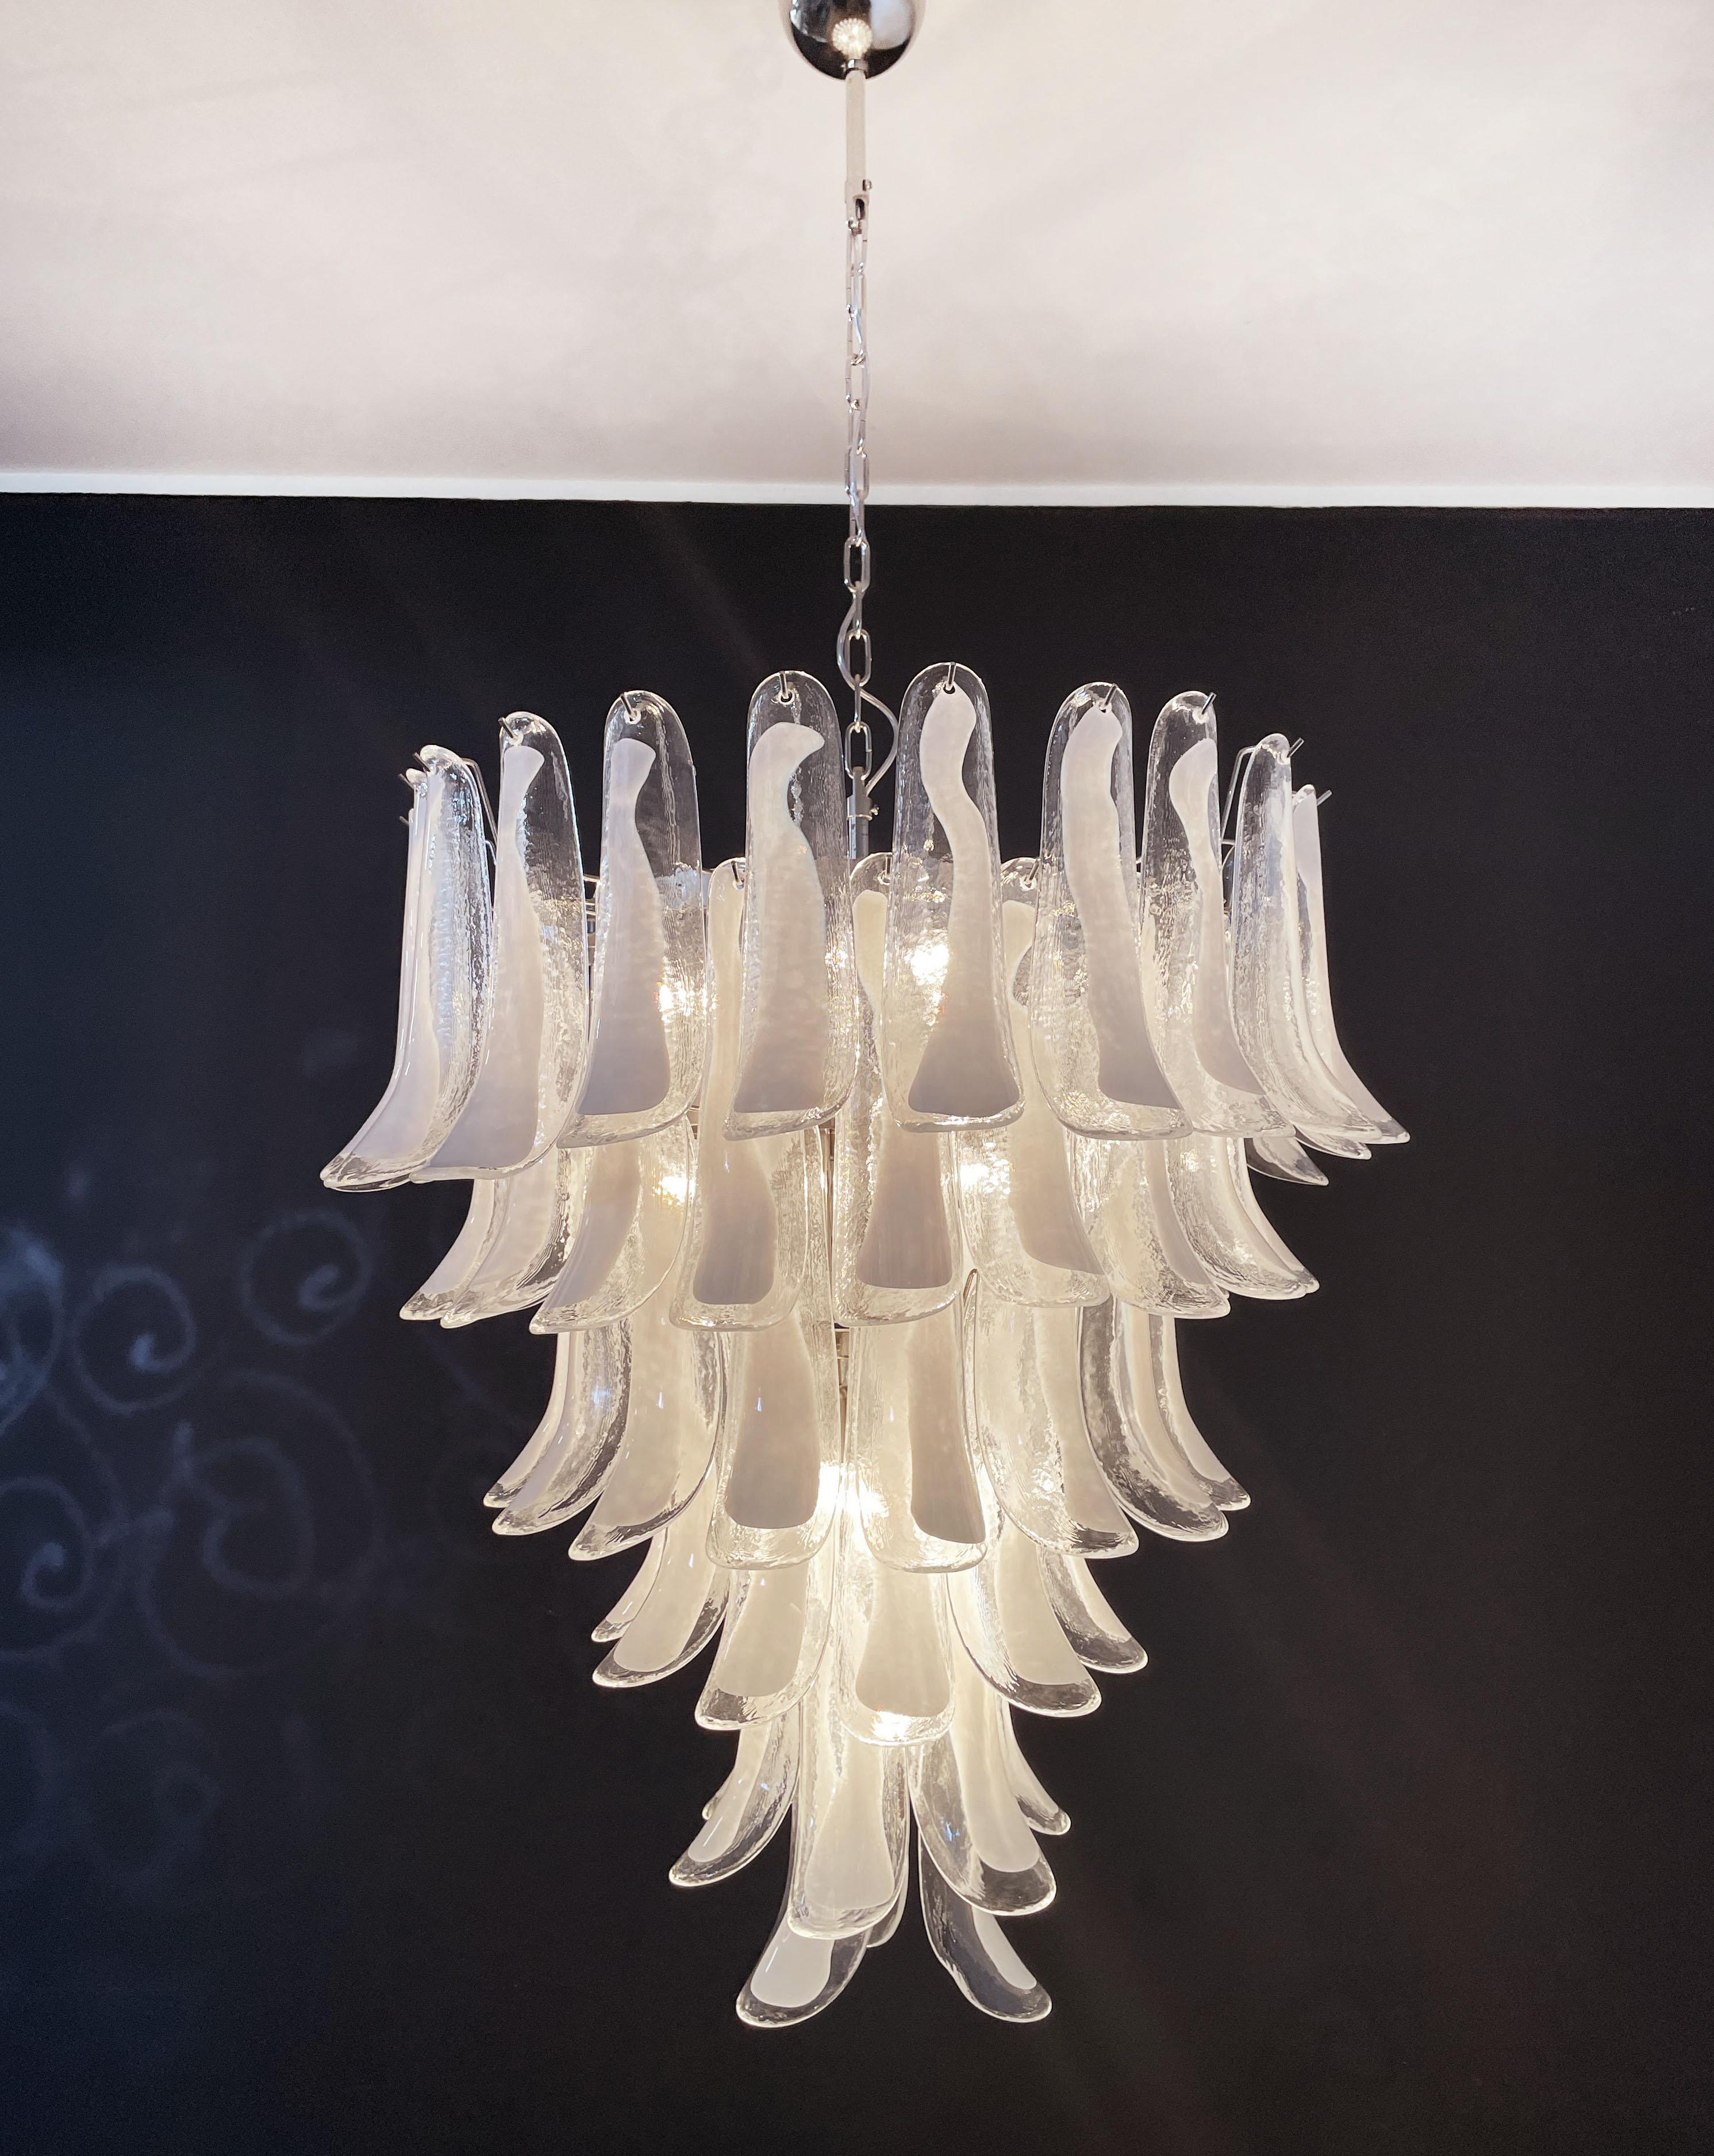 Italian vintage Murano chandelier in the manner of Mazzega - 75 glass petals For Sale 8